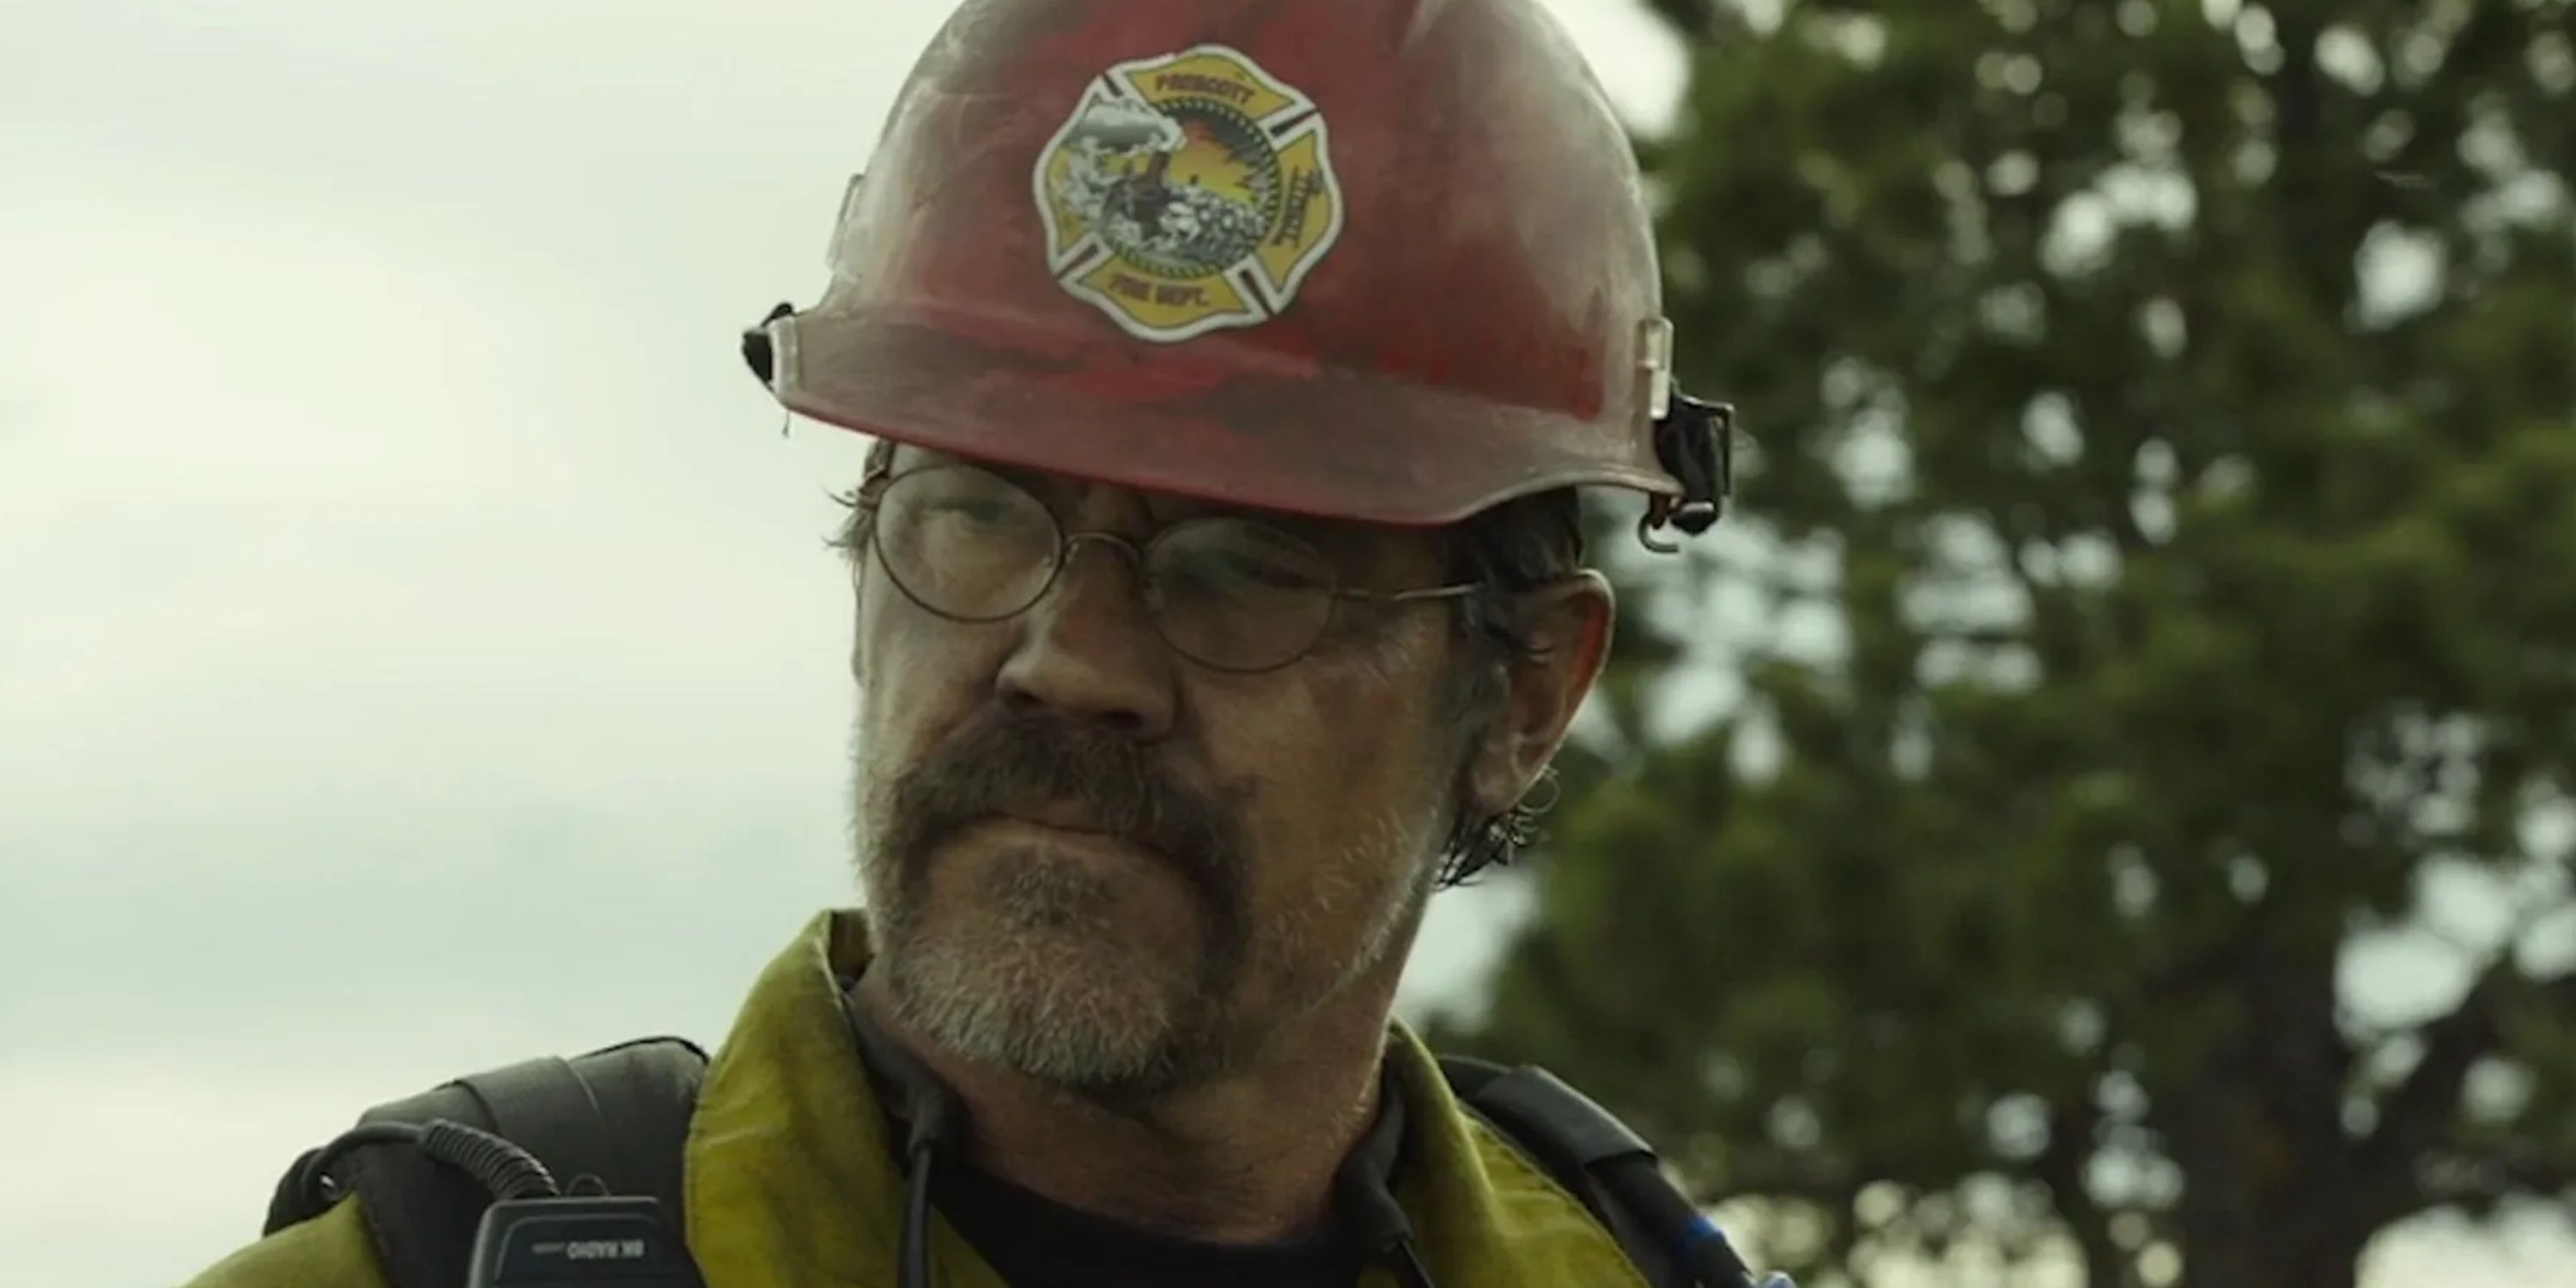 Eric Marsh in his firefighter gear in Only the Brave